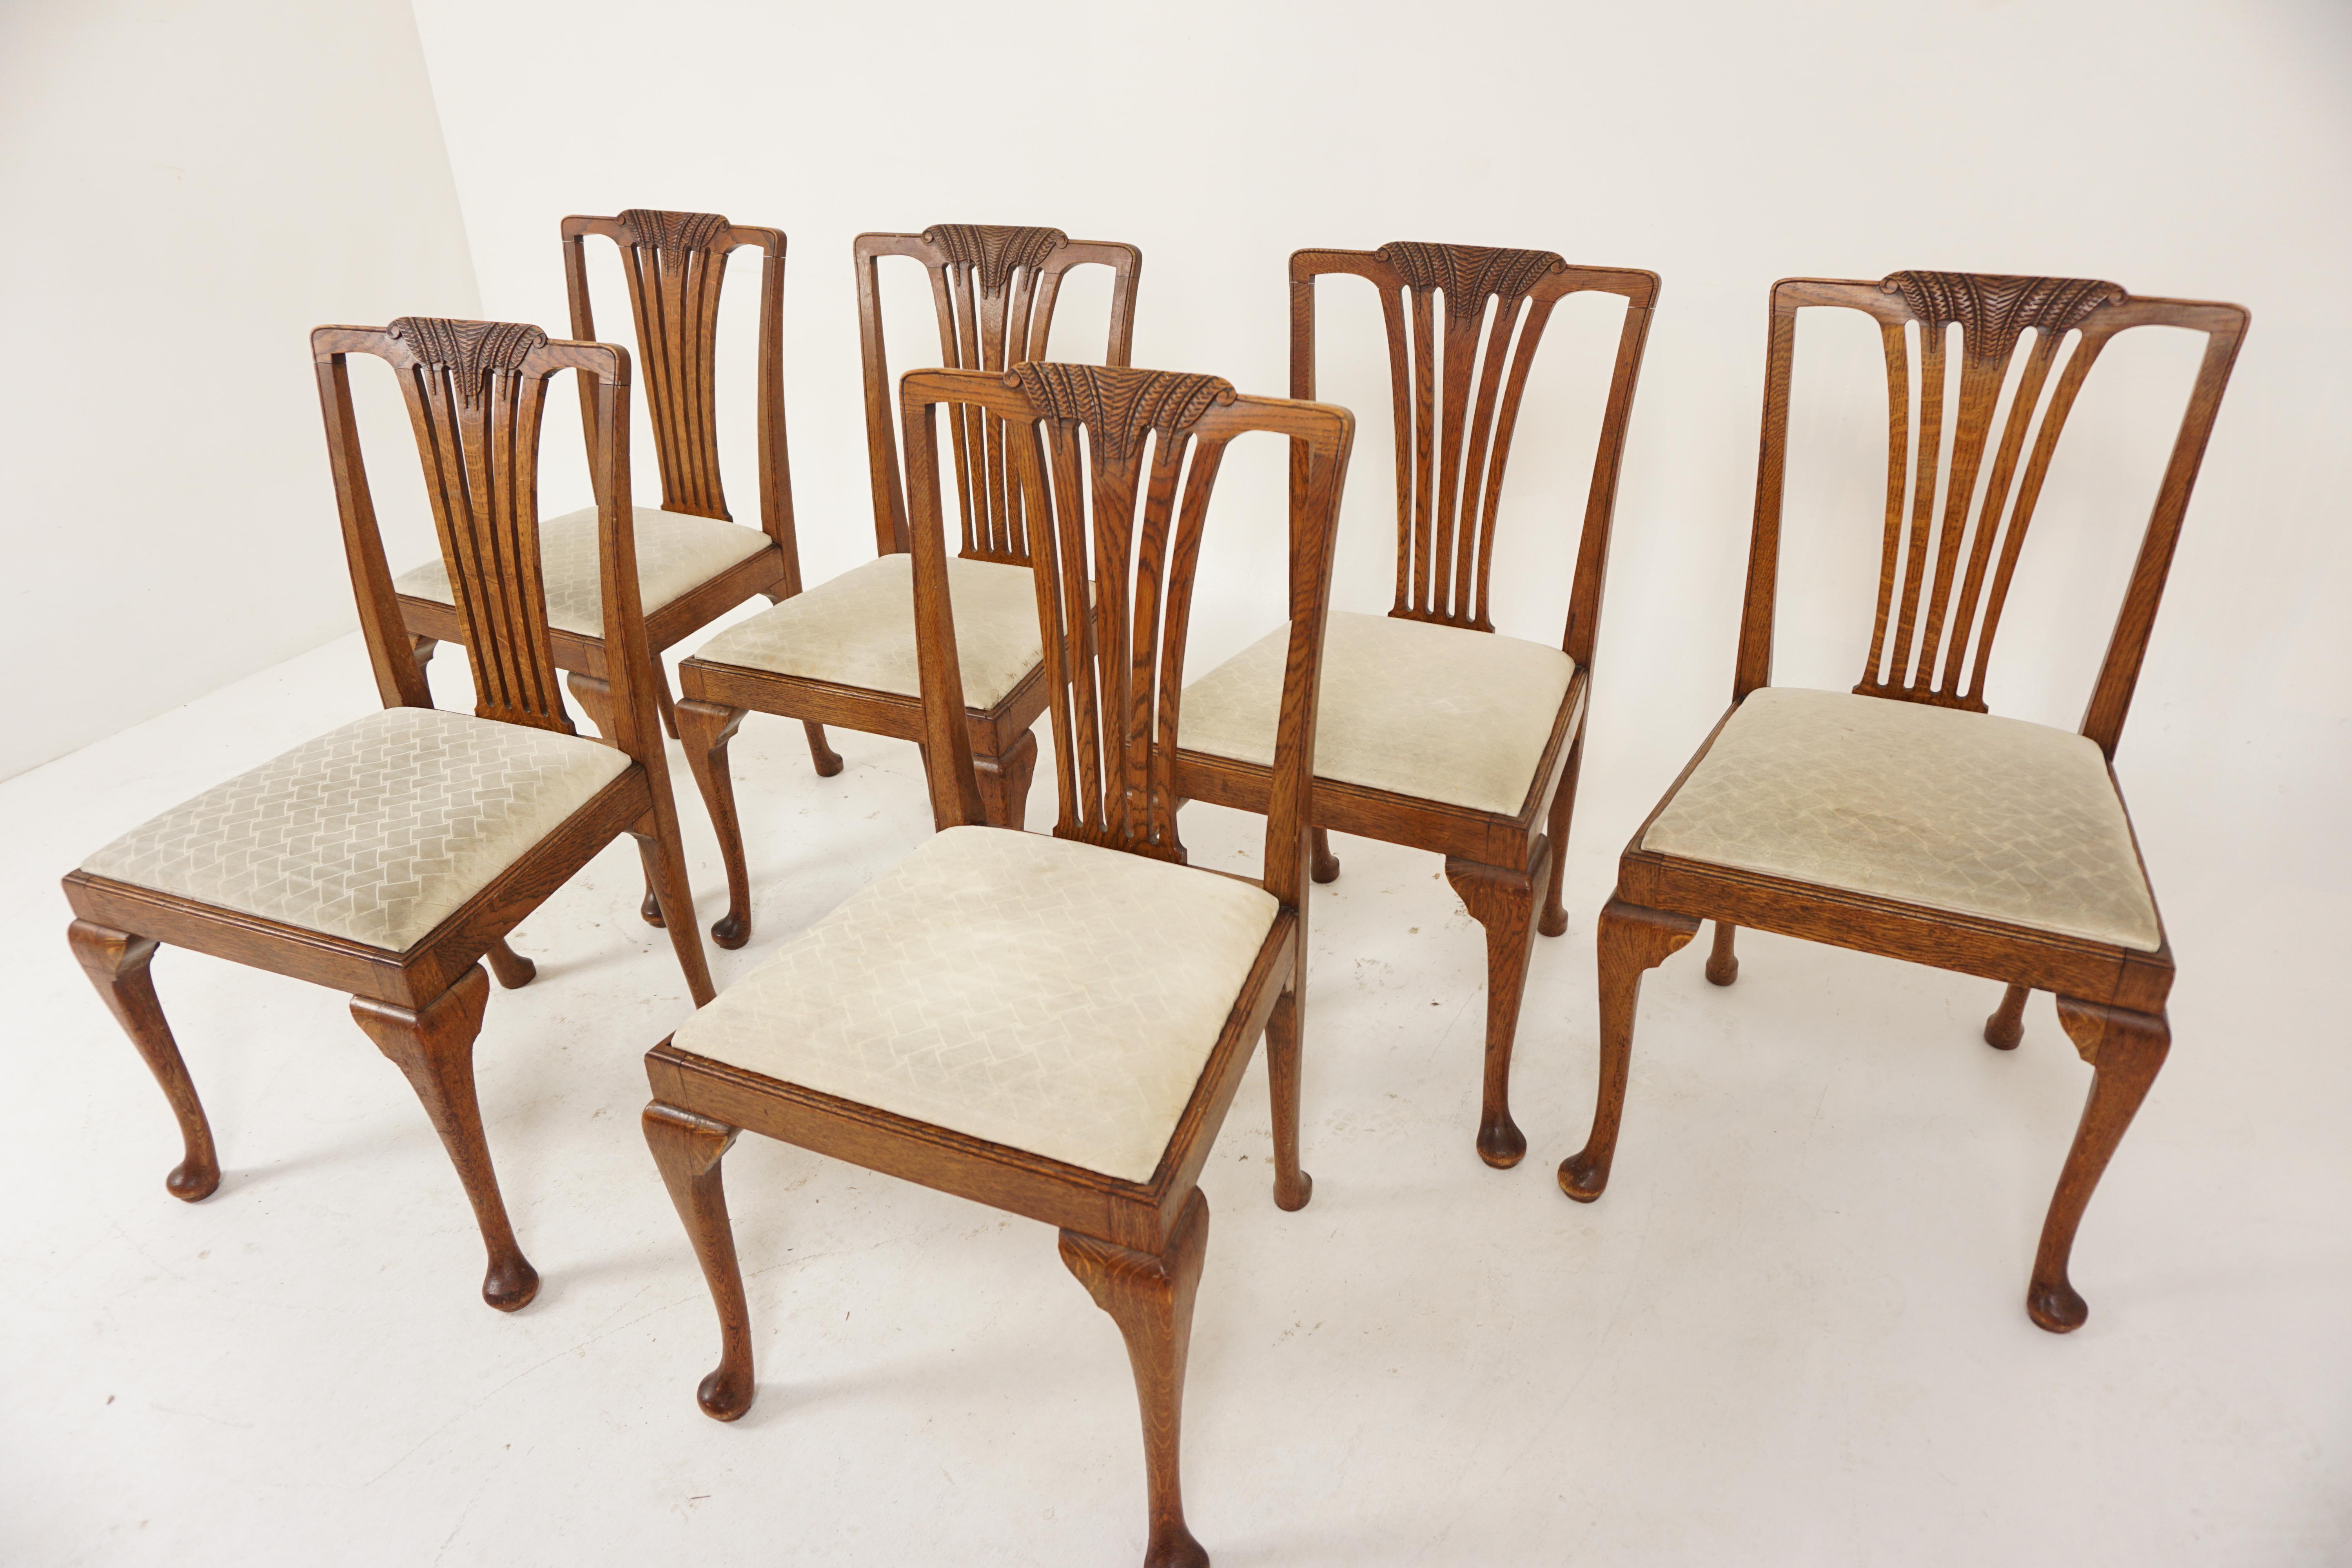 6 antique carved oak Queen Anne style dining chairs, Scotland 1920, B2899

Scotland 1920
Solid oak
Original finish
Carved top rail
With shaped back splats to the back
Large drop in upholstered seat
Standing on cabriole legs to the front and